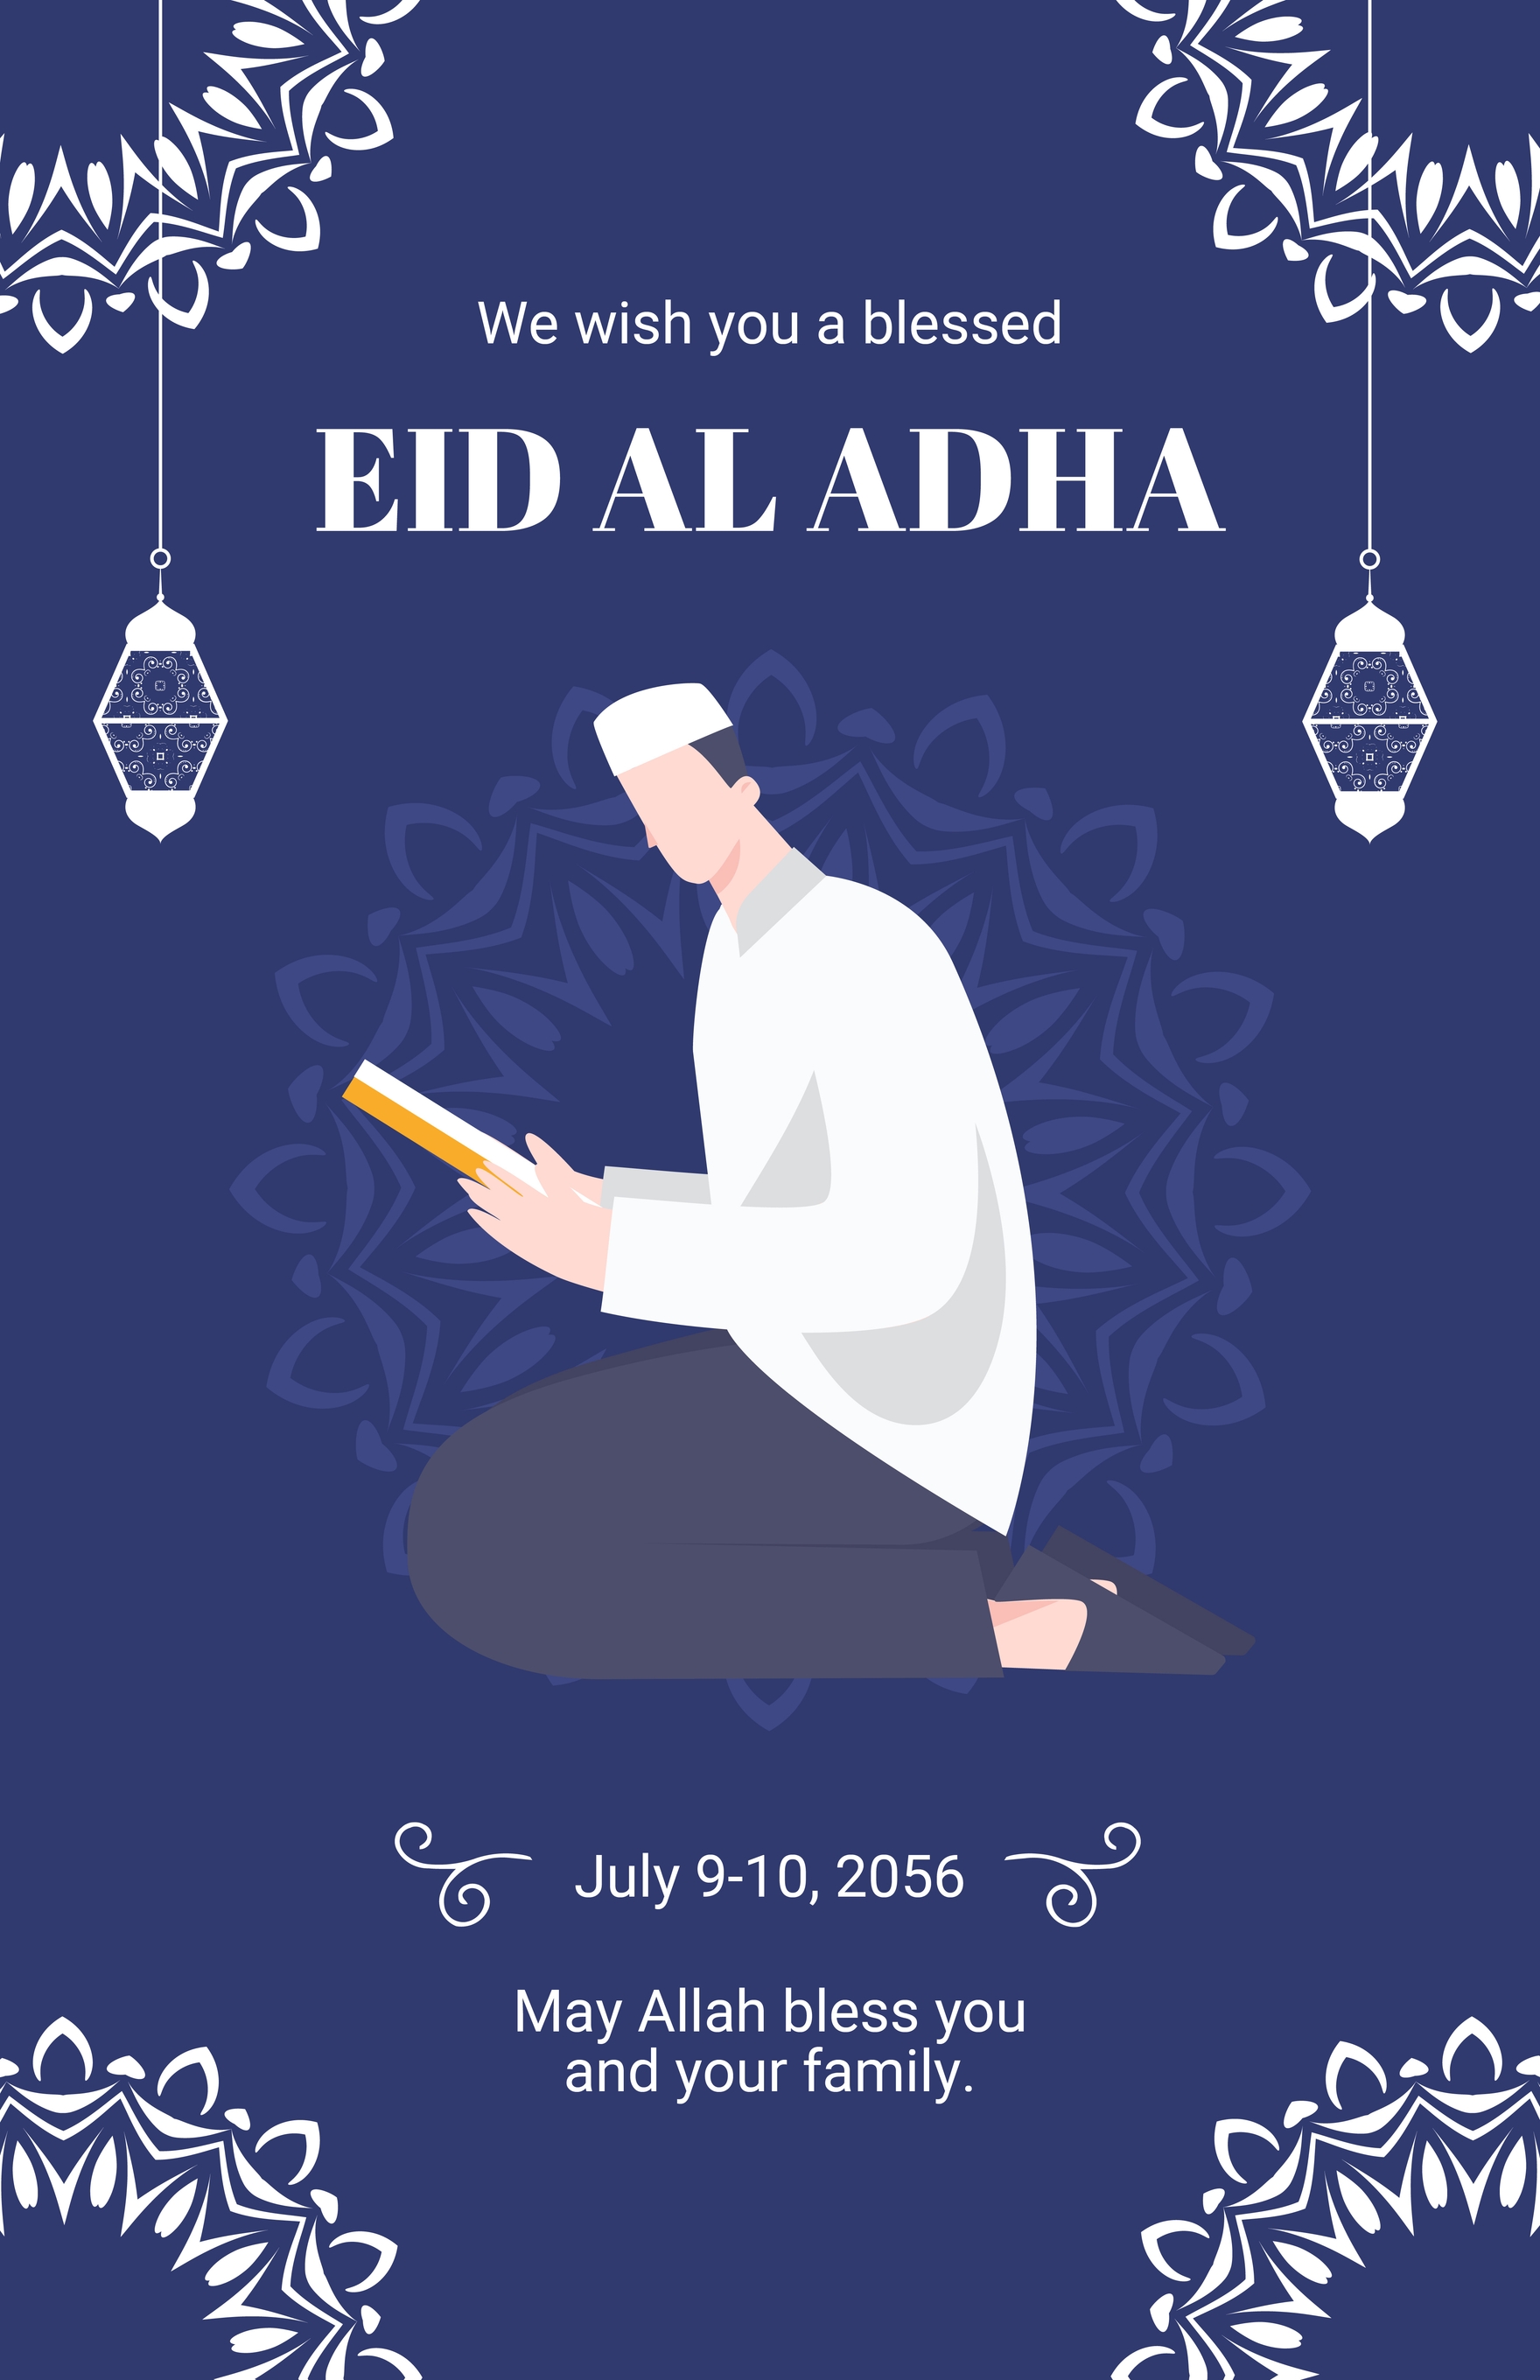 Eid Al Adha Wishes Poster in Word, Google Docs, Illustrator, PSD, Apple Pages, Publisher